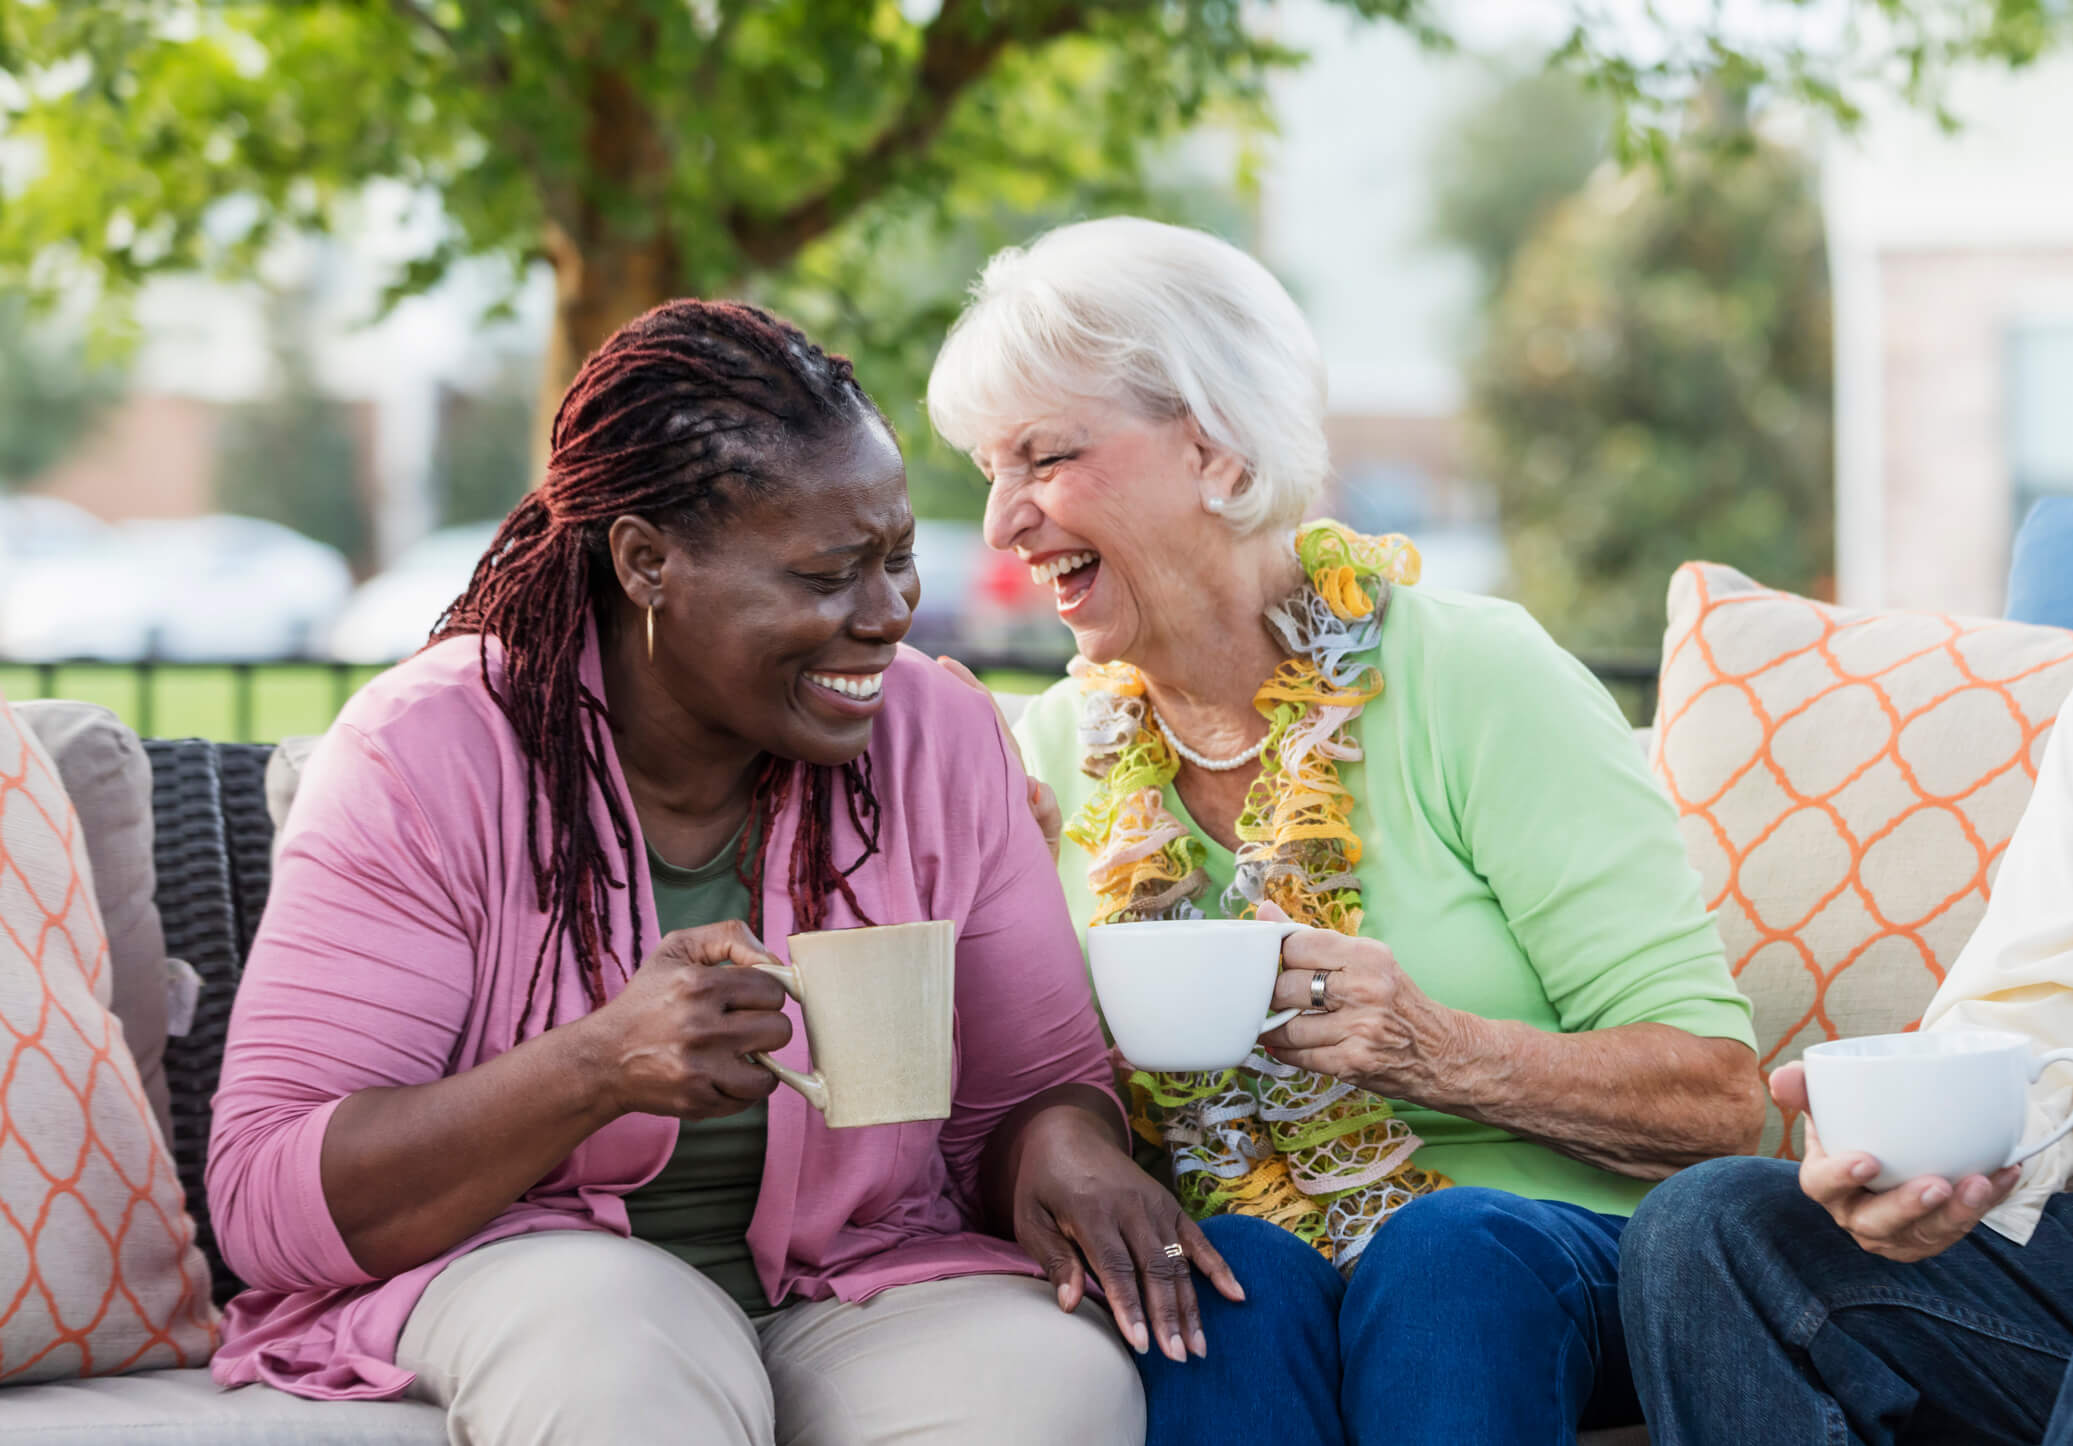 Image of next post - 4 Benefits of Assisted Living